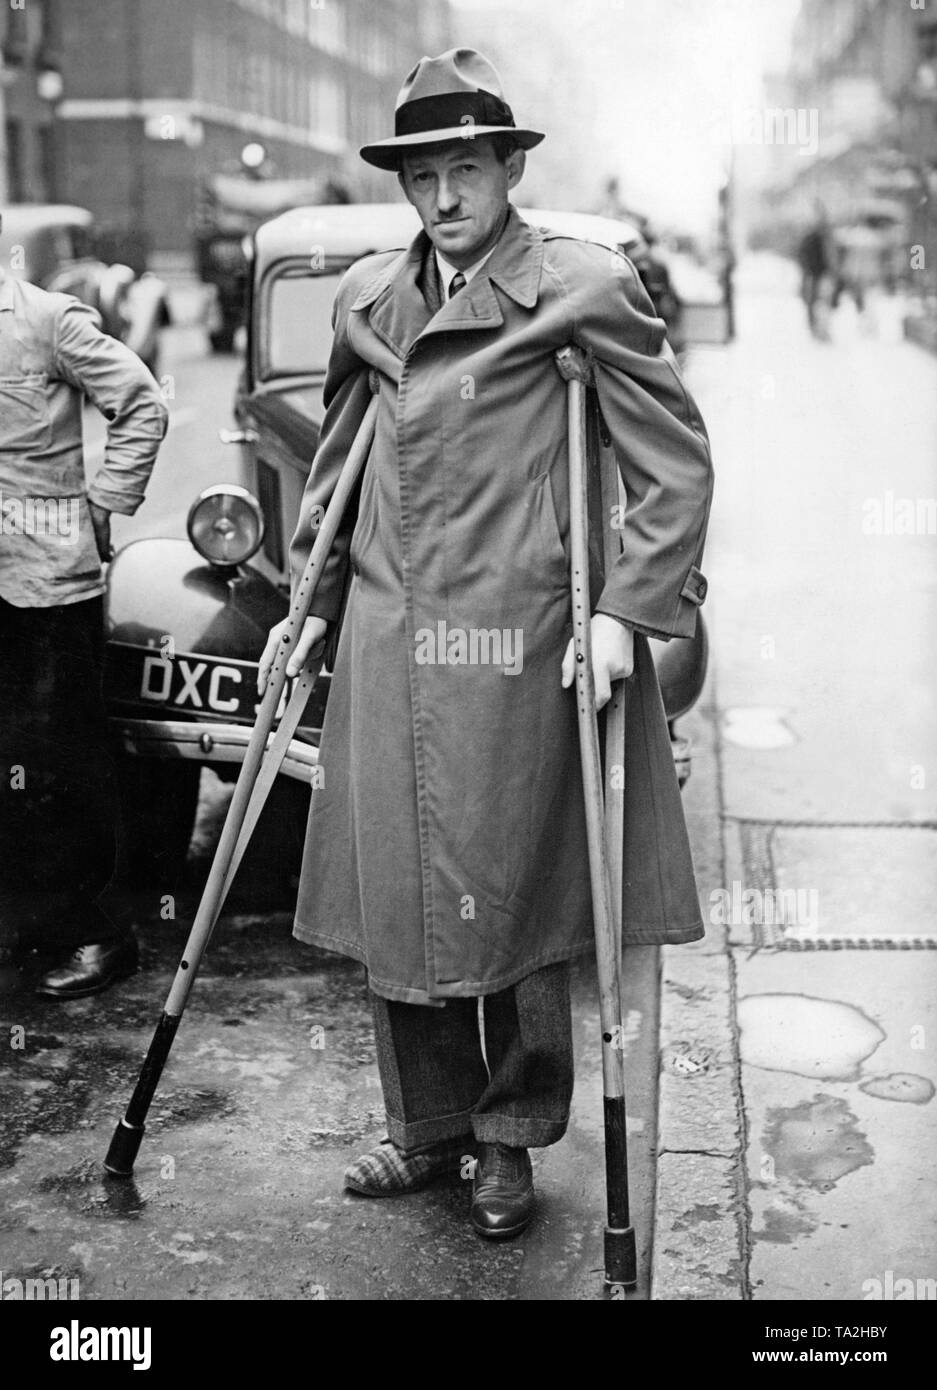 Chairman of the Social Democratic Workers' Party of Germany in the Czechoslovak Republic Wenzel Jaksch with crutches in front of his London hotel on October 5, 1938. The purpose of his stay in London was to talk to members of the Labor Party about aid for the refugees of the Sudetenland. Stock Photo